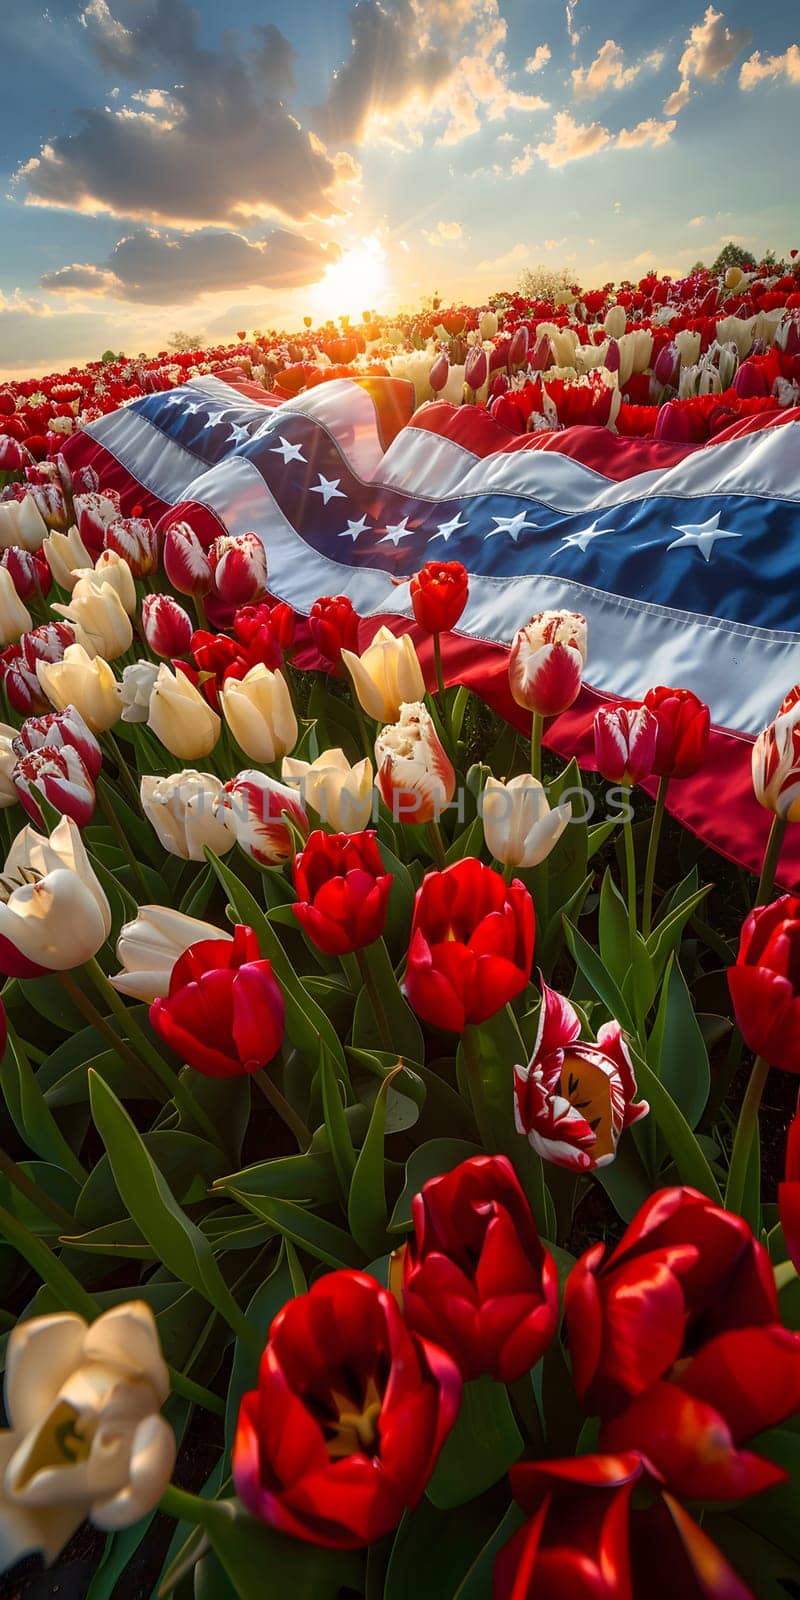 Field of red and white tulips with American flag in the background by Nadtochiy